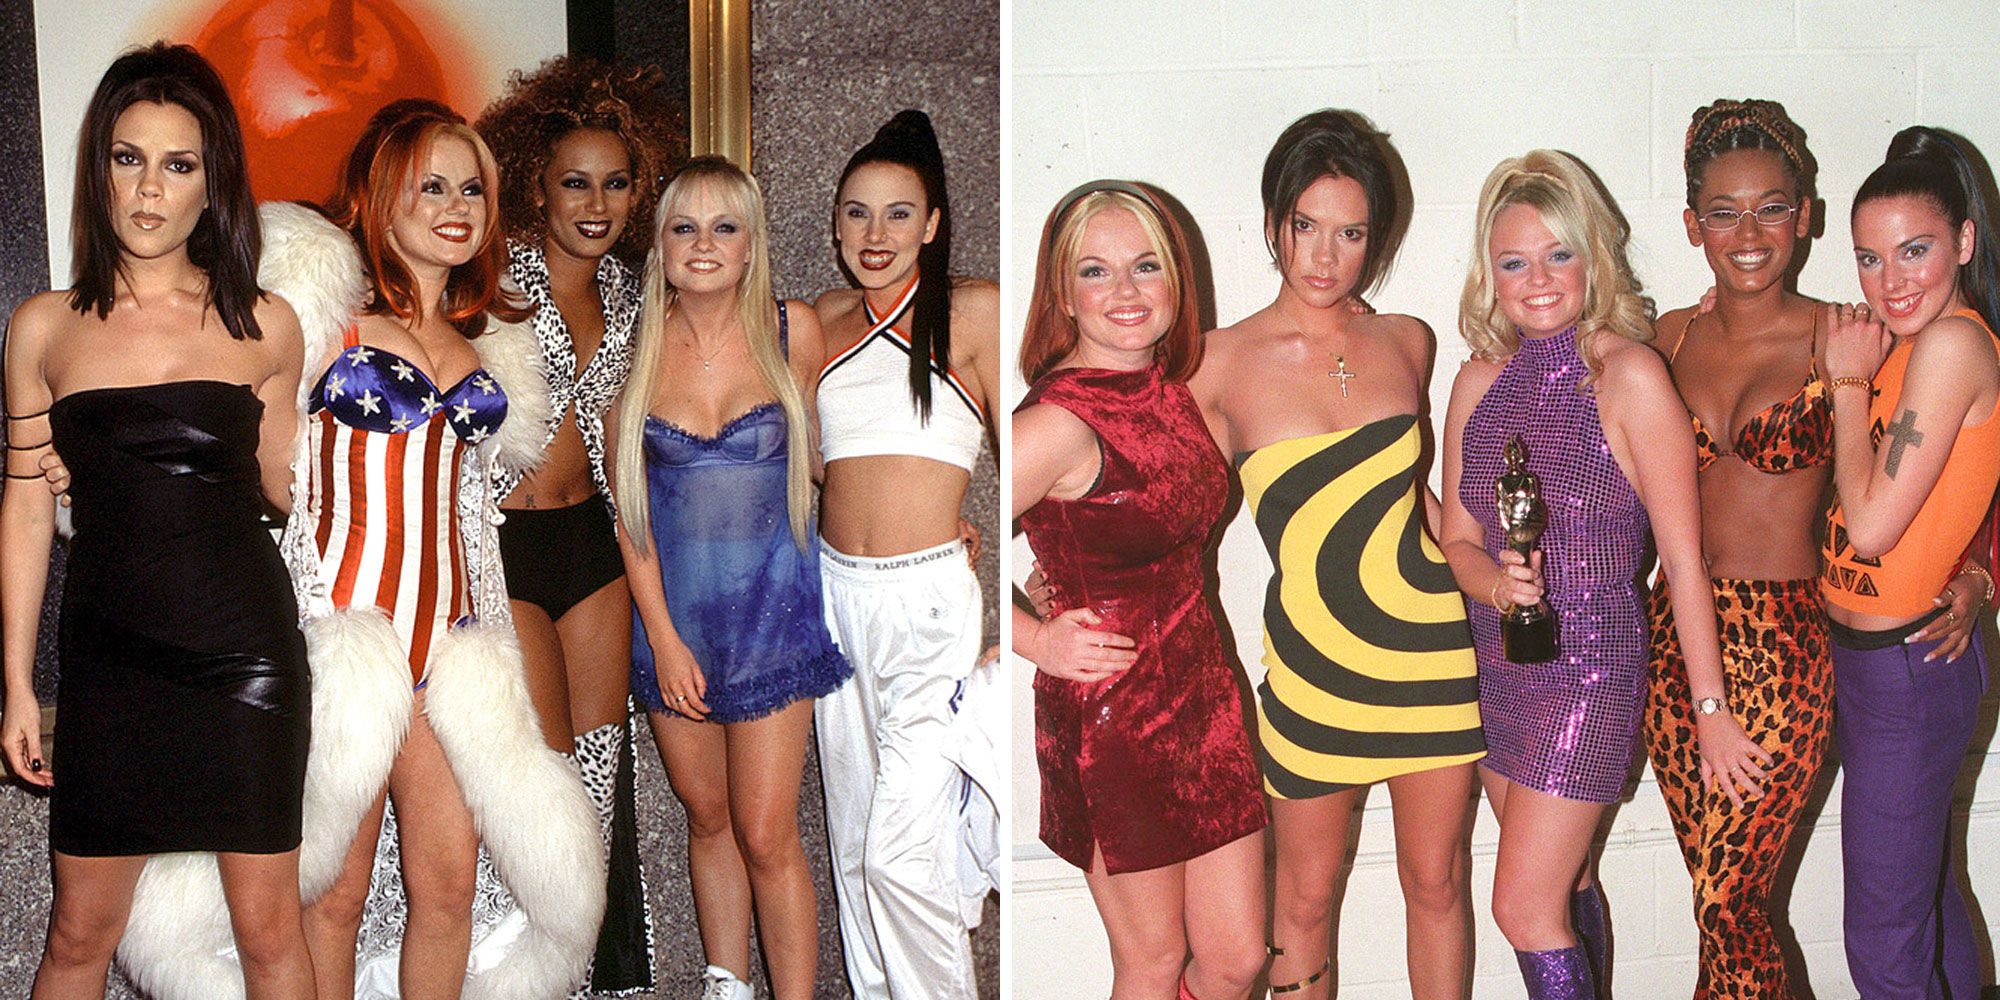 41 Incredible Photos of the Spice Girls' Style - Spice Girls Best Fashion